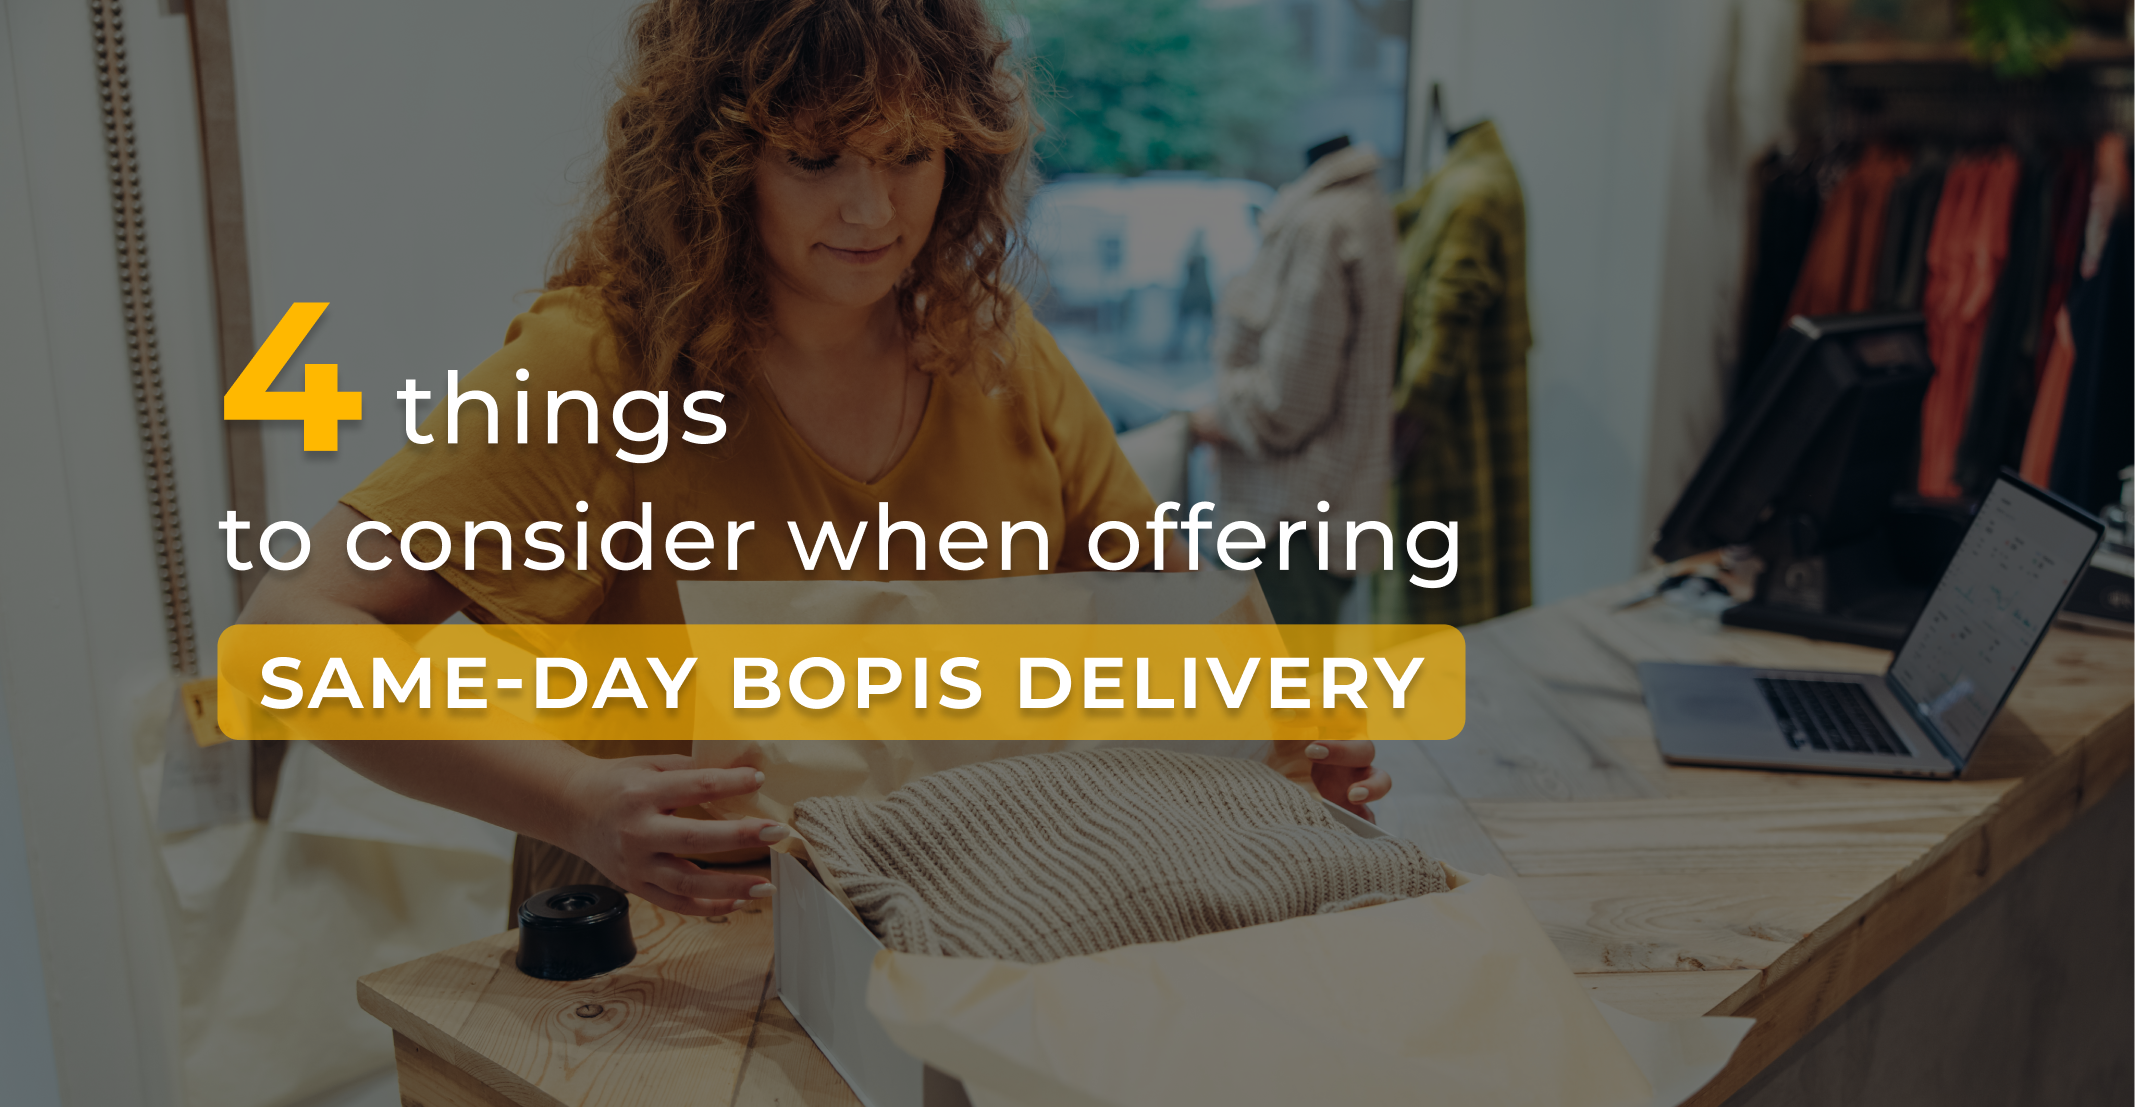 4 Things to consider when offering same-day BOPIS delivery